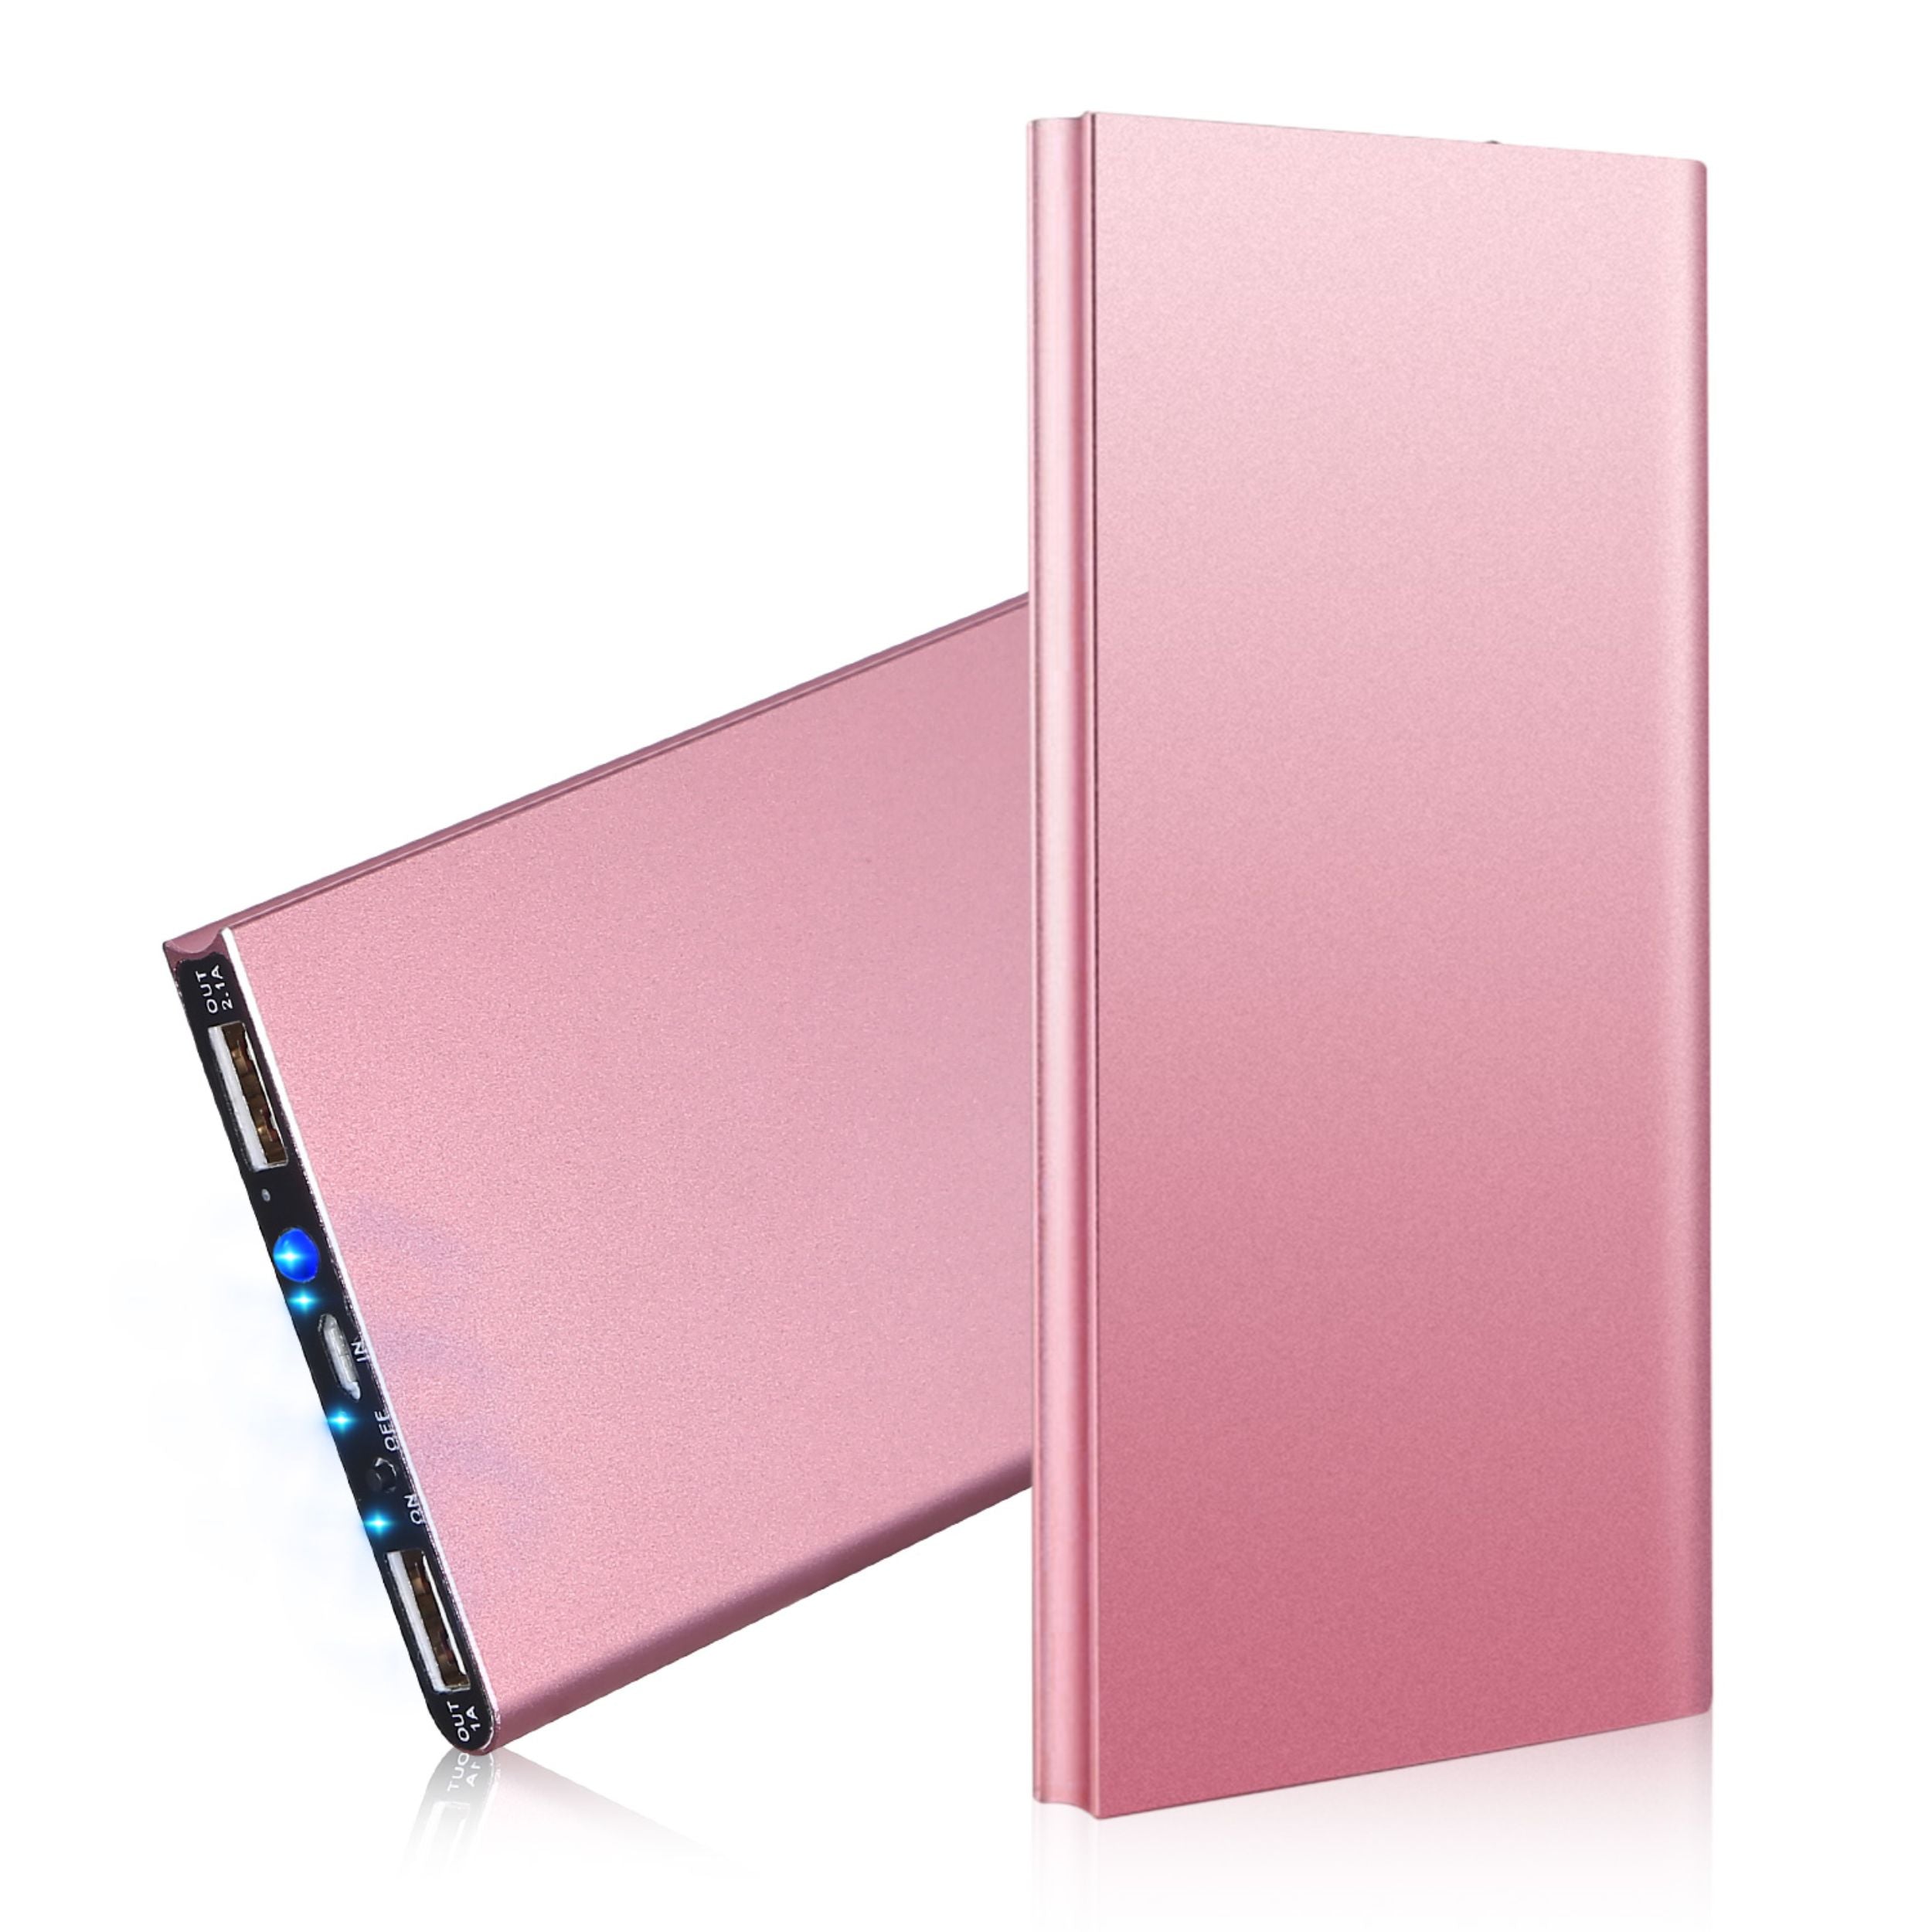 title:20K mAh Ultra-thin Power Bank: Dual USB, Phone Charger;color:Rose Gold